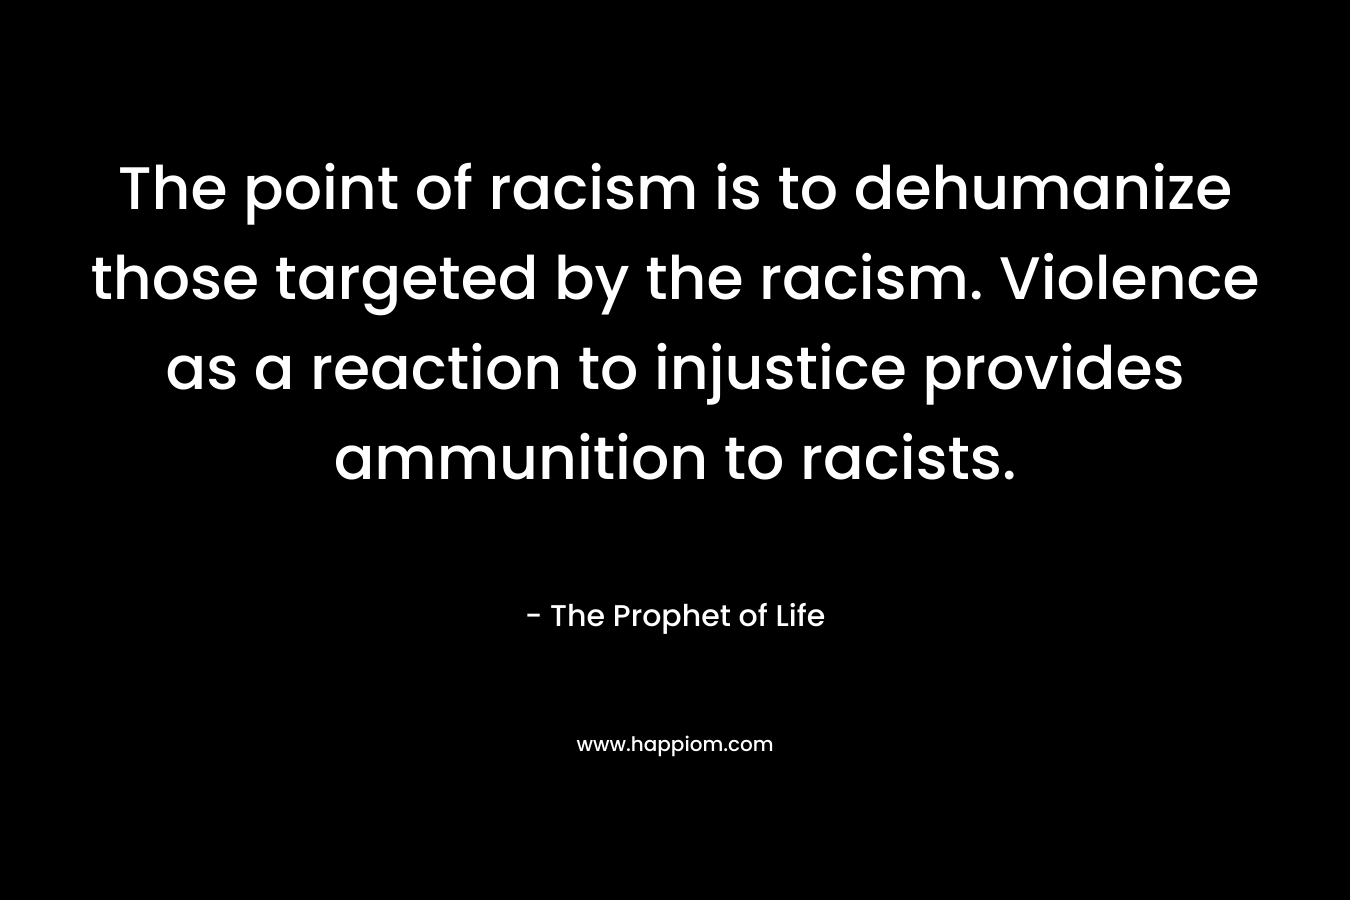 The point of racism is to dehumanize those targeted by the racism. Violence as a reaction to injustice provides ammunition to racists. – The Prophet of Life